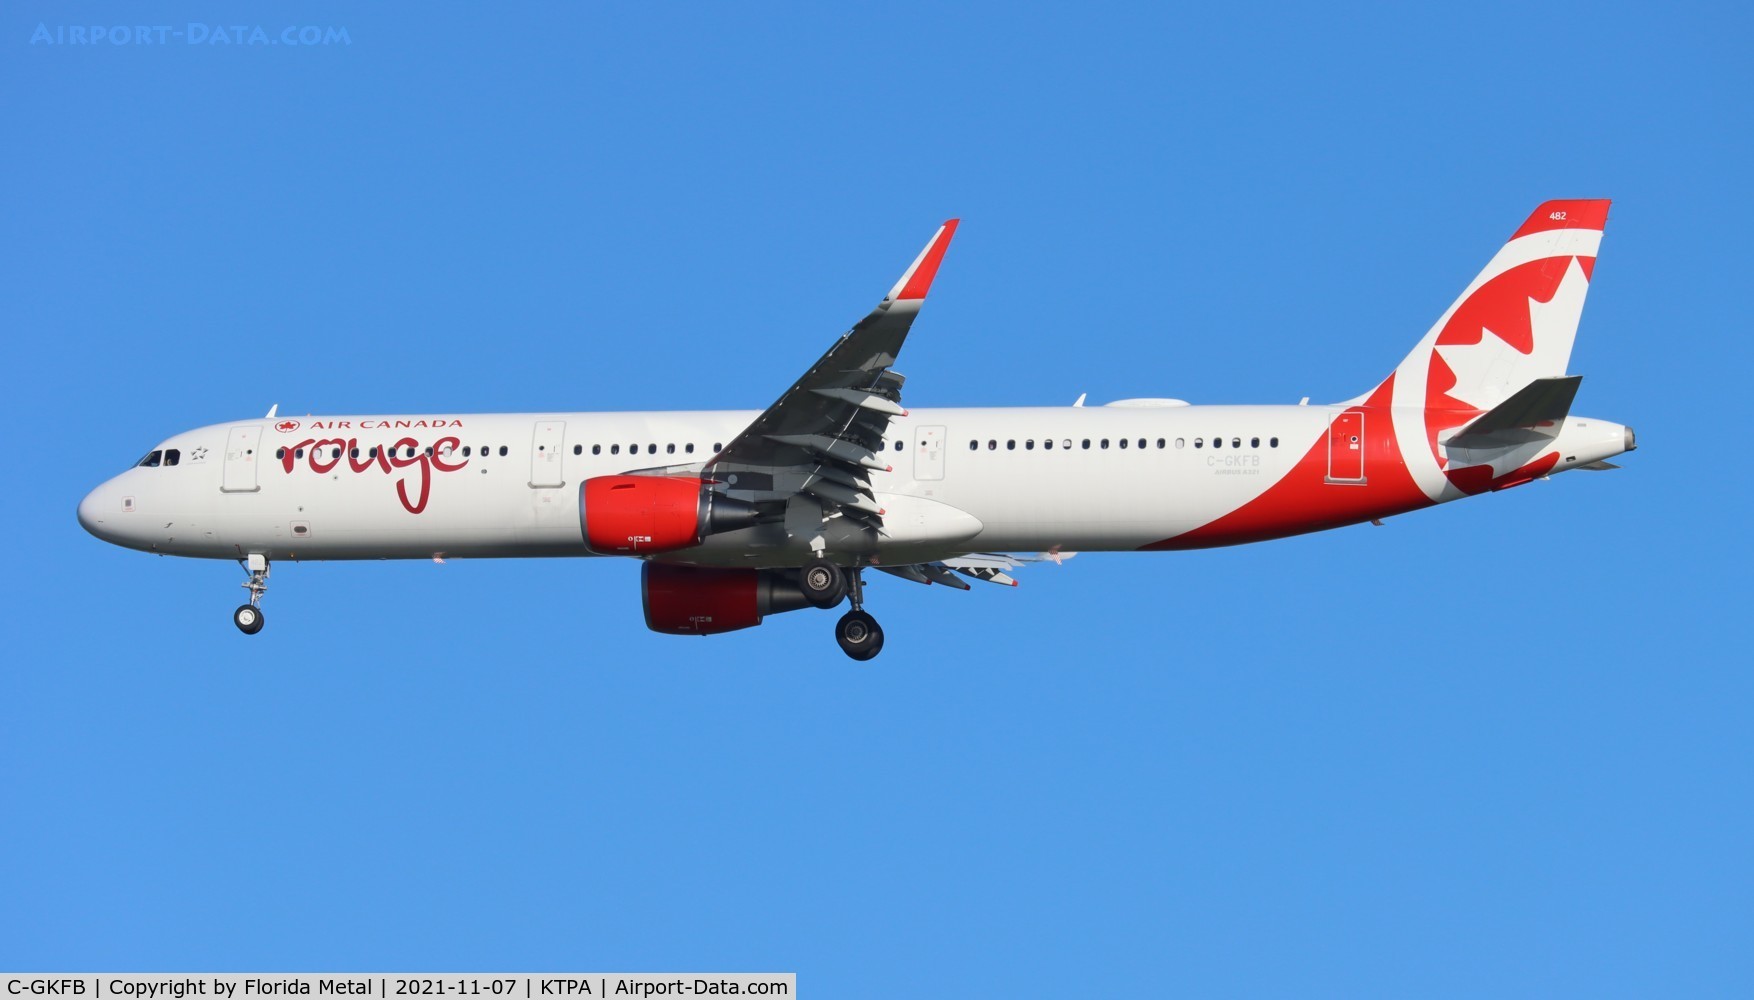 C-GKFB, 2018 Airbus A321-211 C/N 8232, Rouge A321 zx